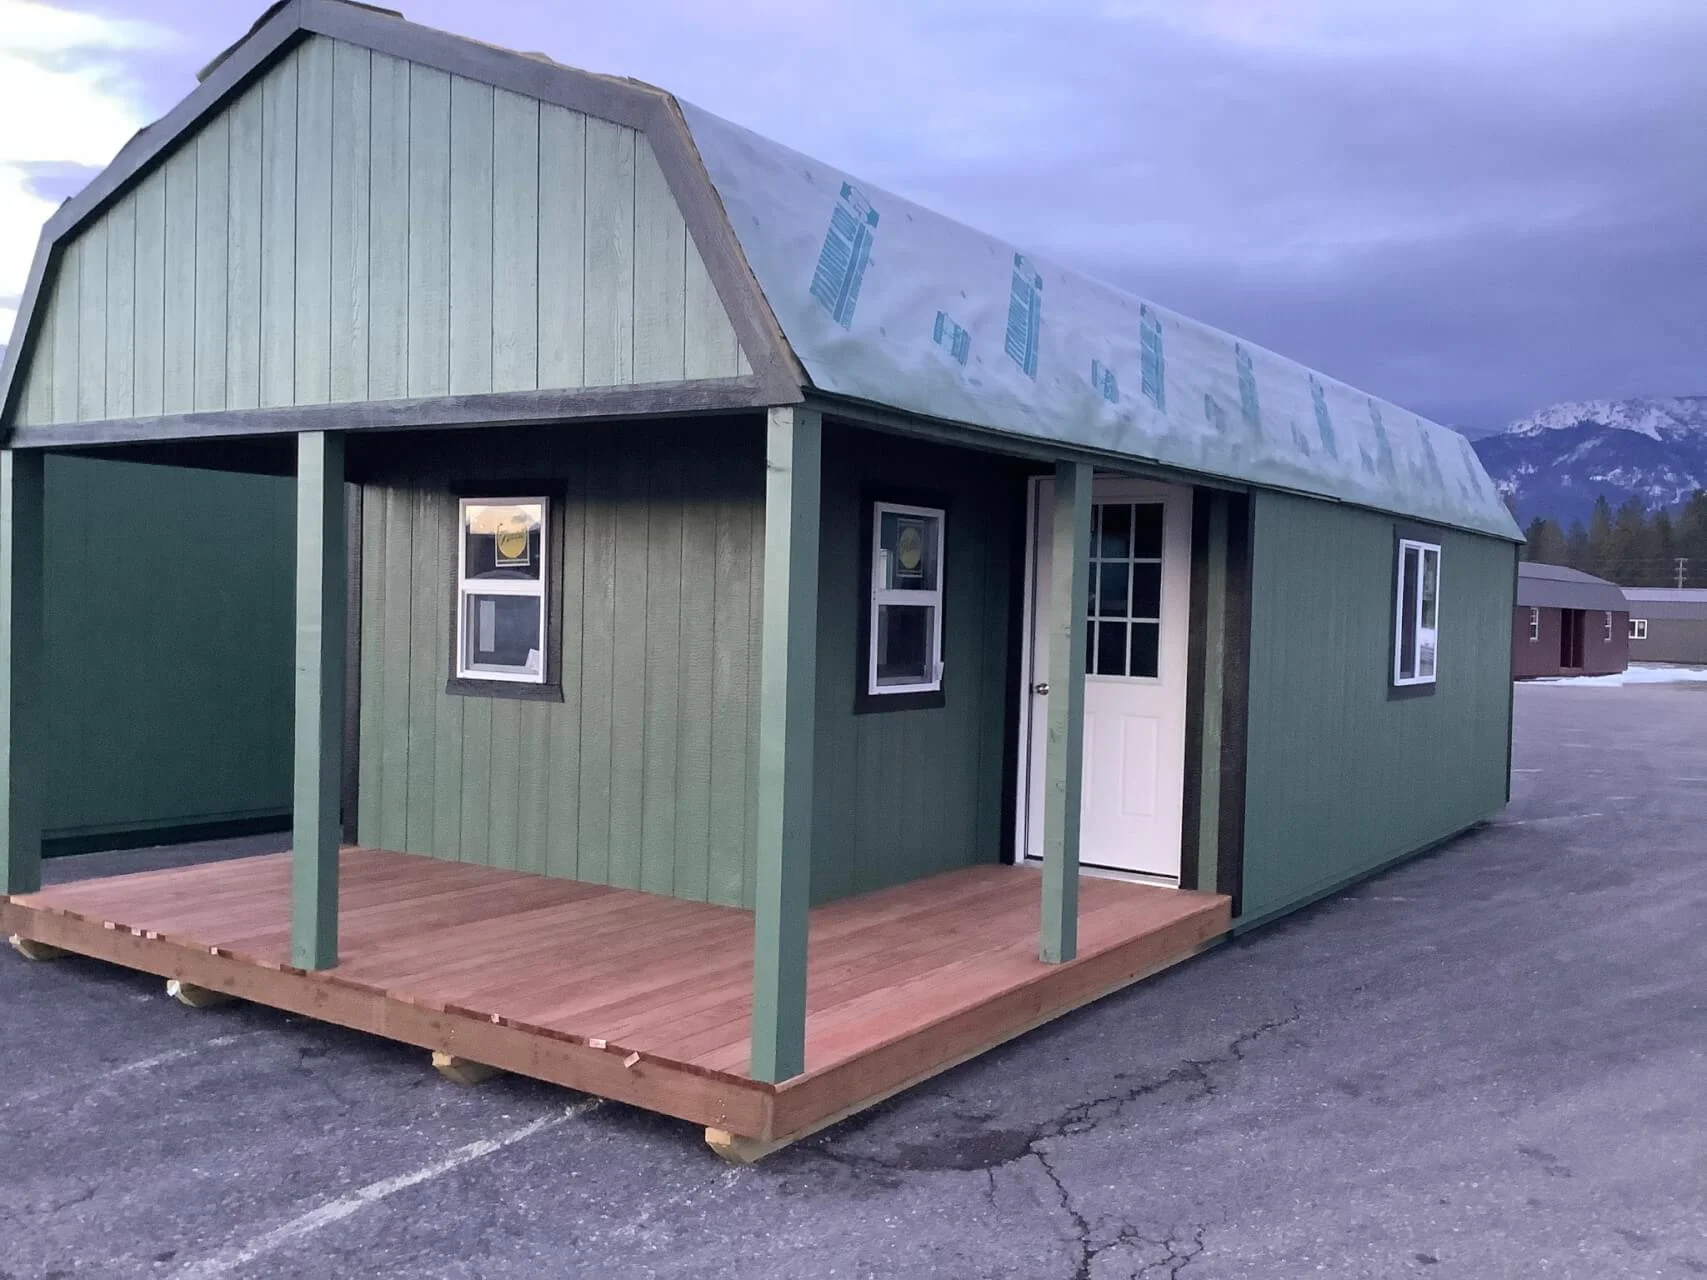 Mission Valley Sheds LLC Portable Building Sales Cabins Garages Sheds White Fish Kalispell Ronan and Missoula MT 11